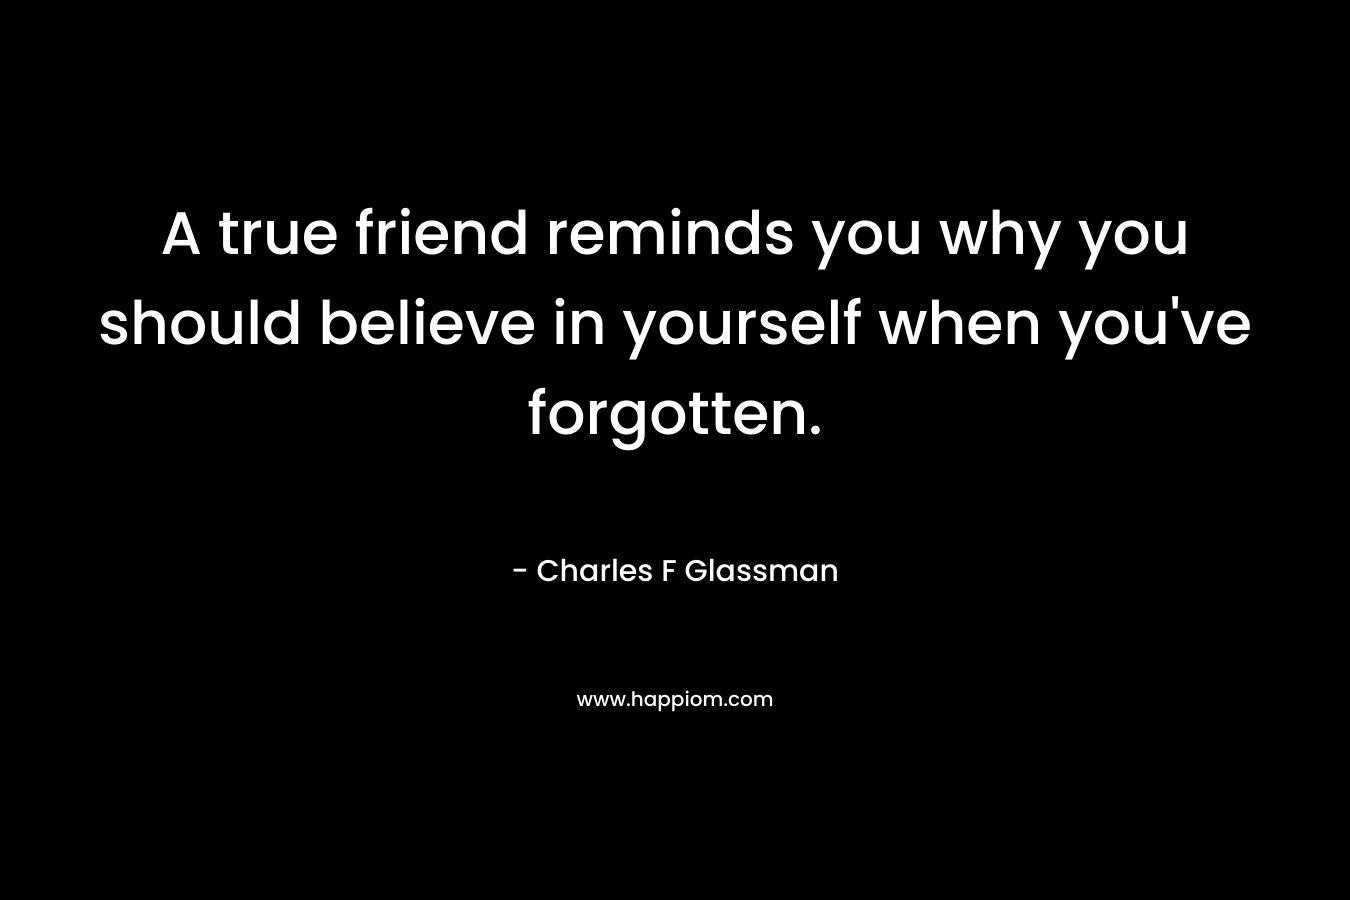 A true friend reminds you why you should believe in yourself when you've forgotten.